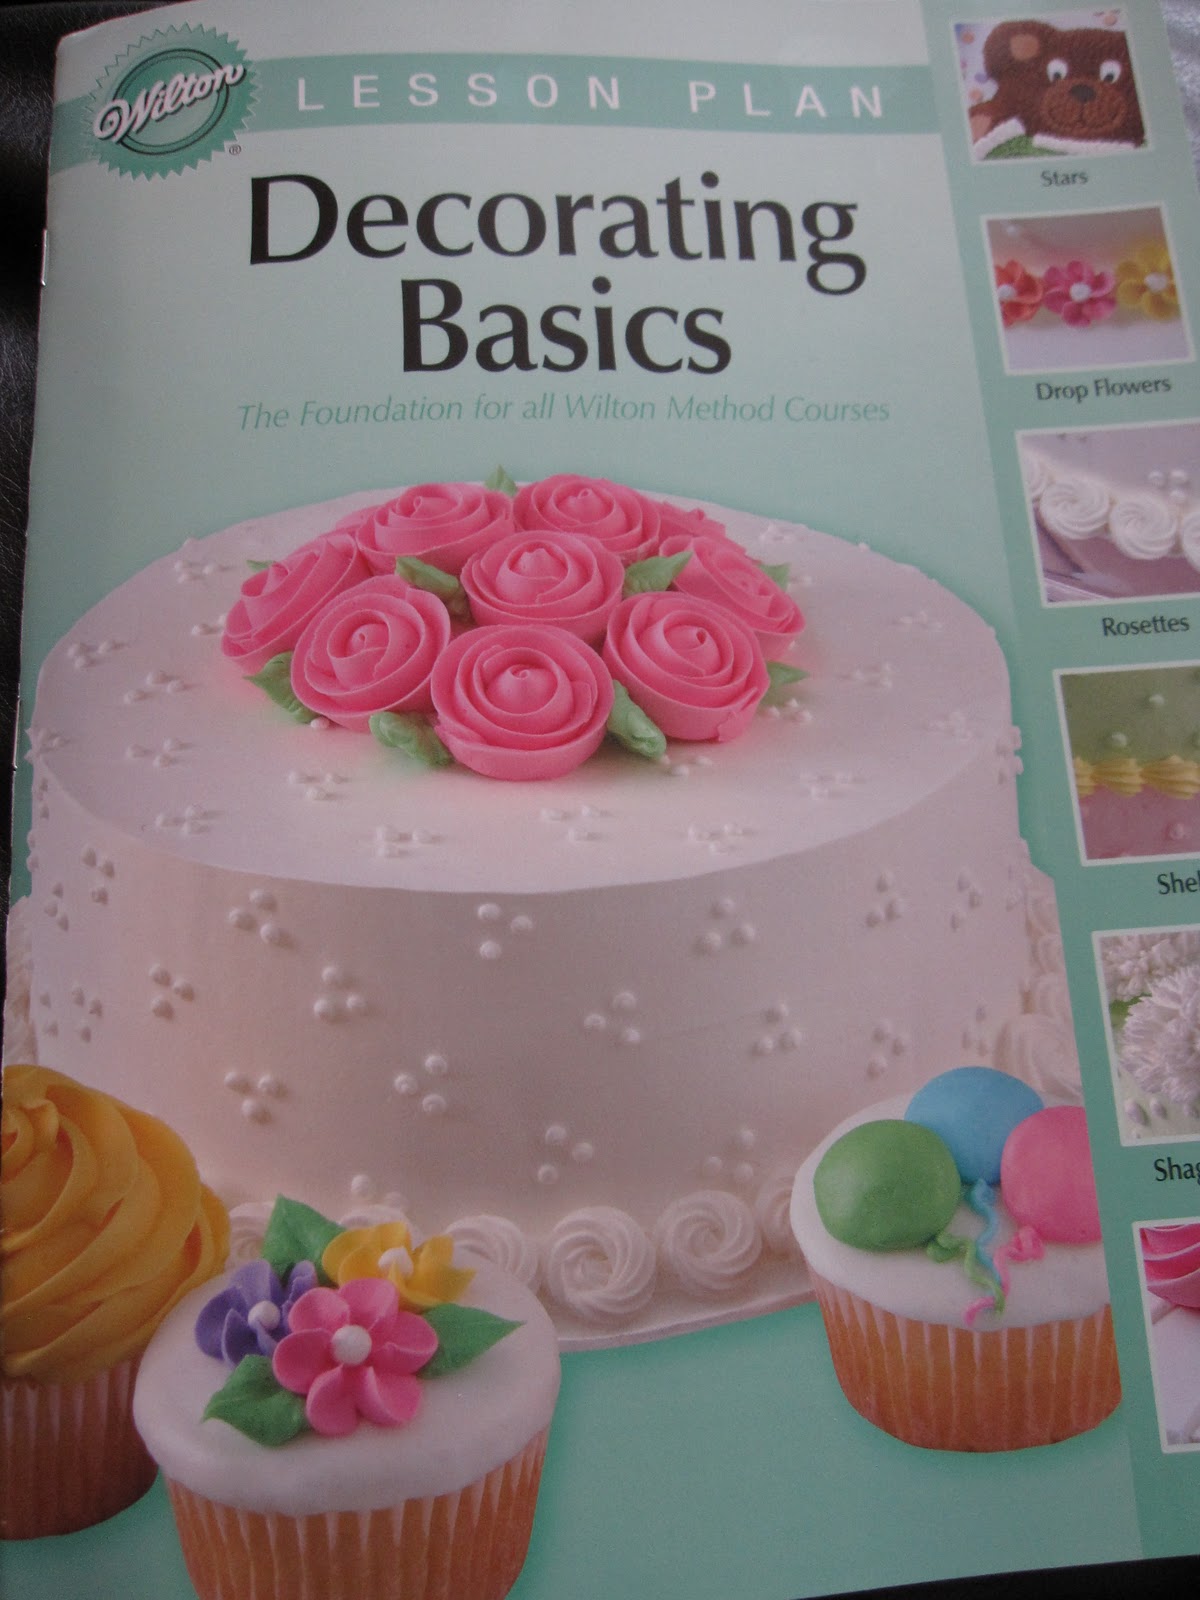 Michael's Basic Cake Decorating Class - Day 1 - She Bakes Here